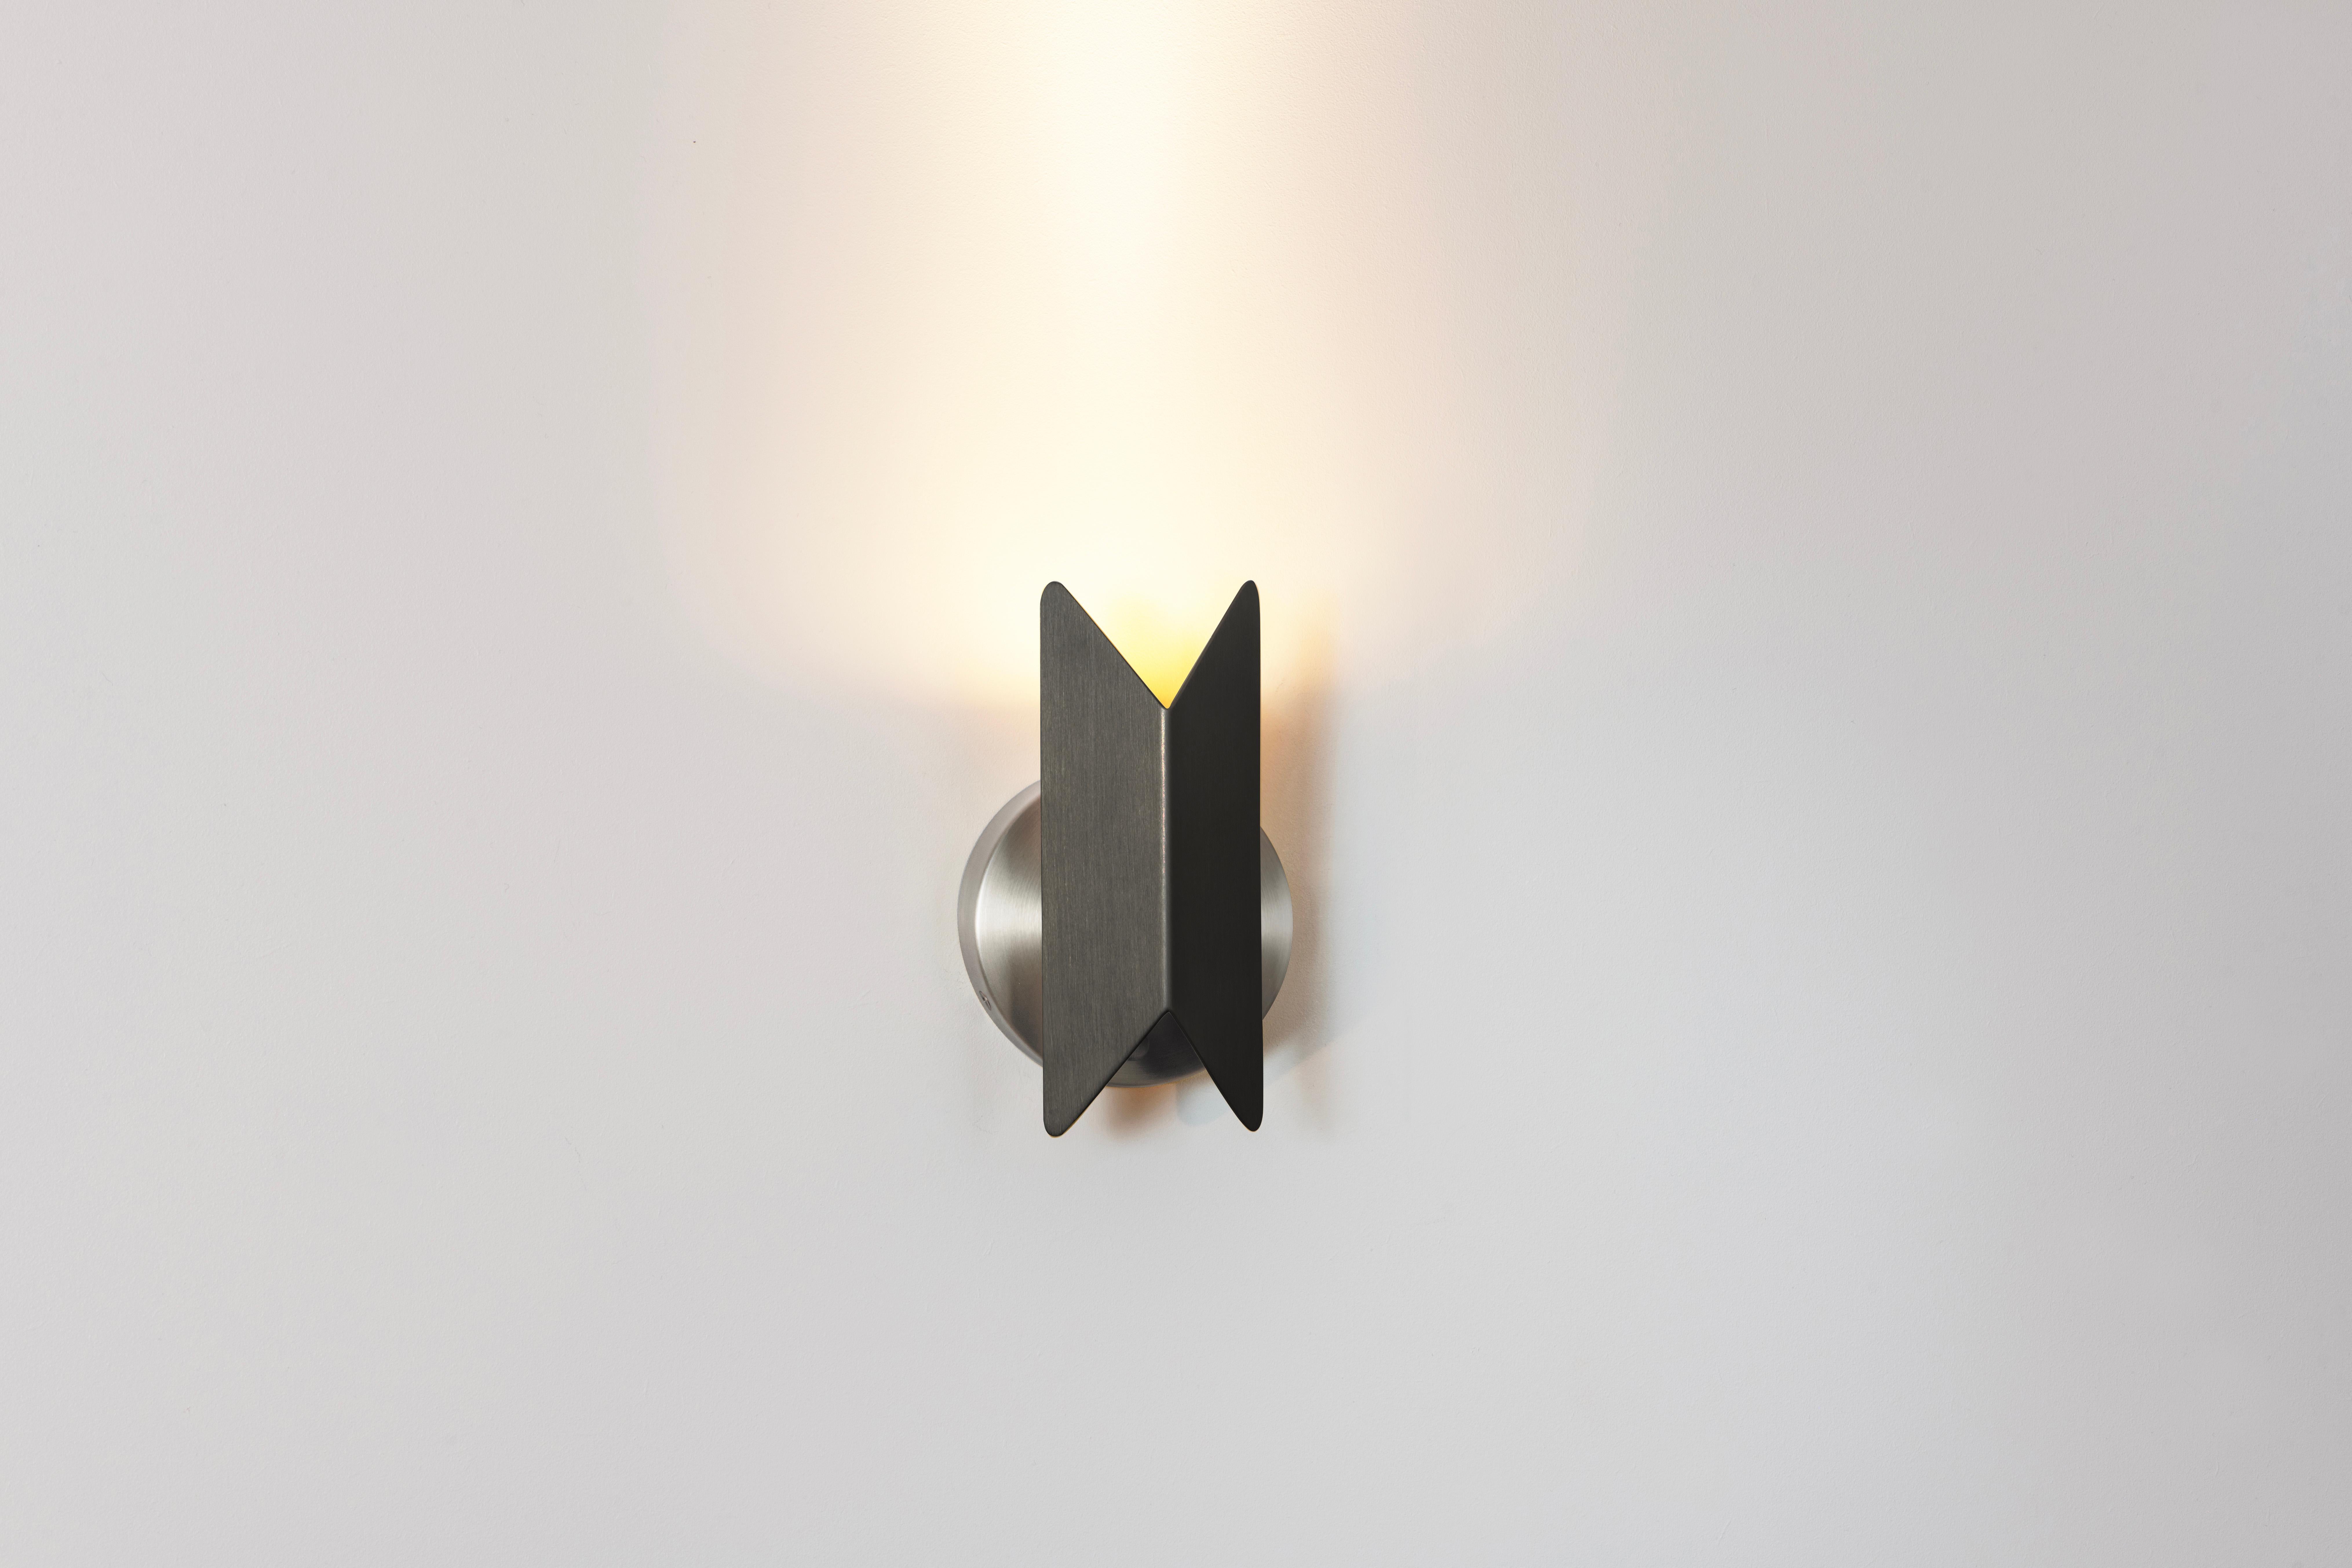 Pirouette V1 Wall Light by Emilie Cathelineau
Dimensions: D 9 x W 11 X H 18.6 cm
Materials: Solid brass, Satin graphite.


Pirouette is a unique little wall lamp, both decorative and functional. The 360° rotation of its light beam and its